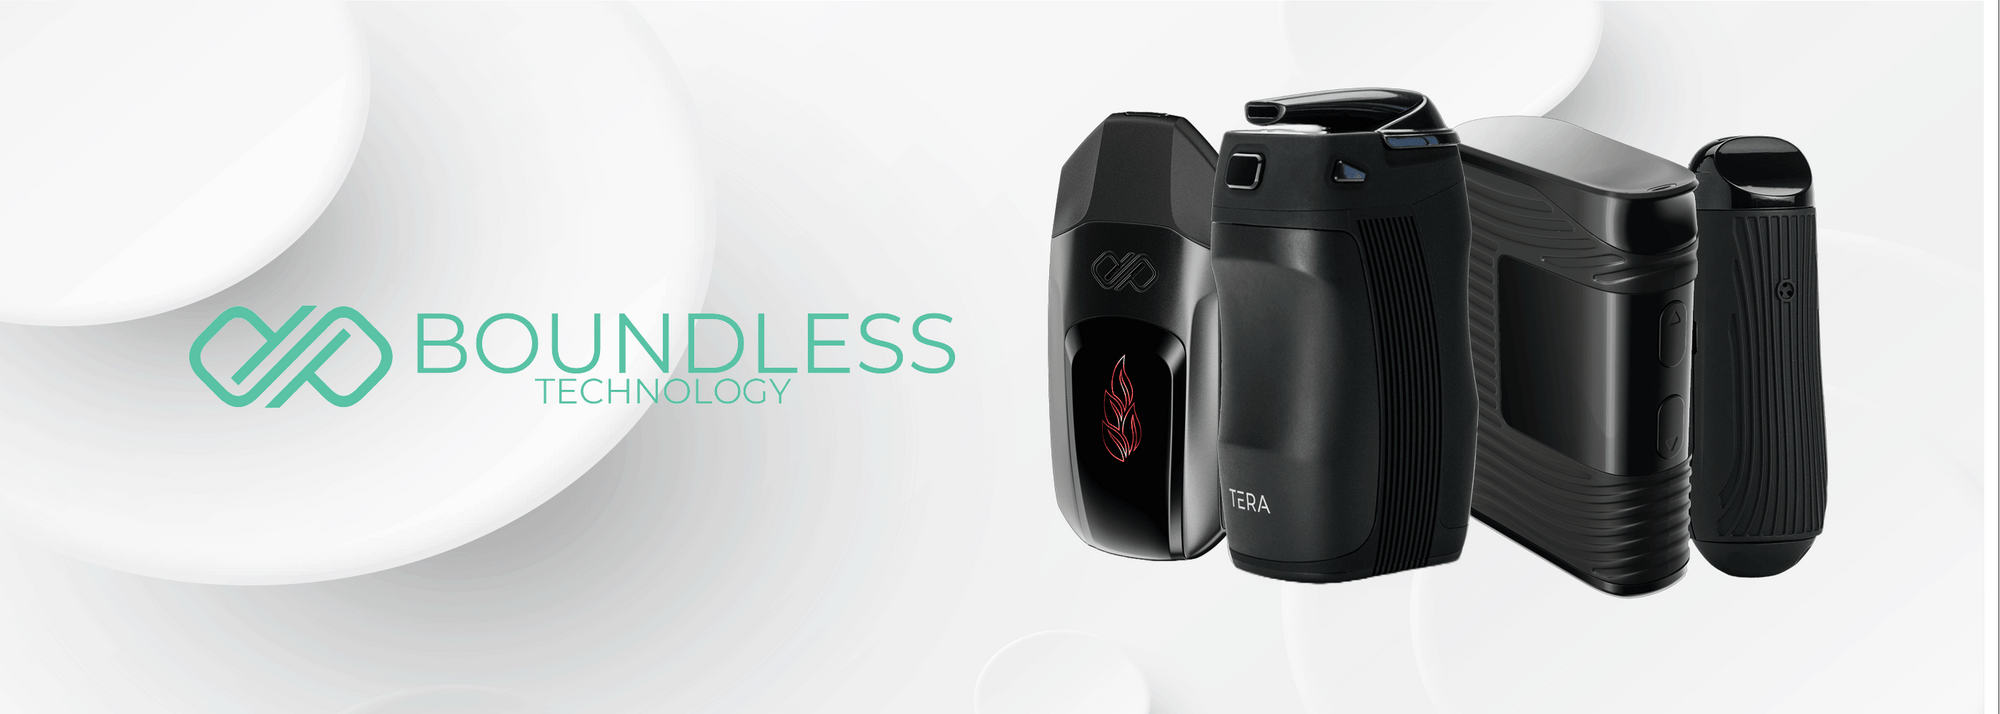 Buy Boundless Technology Dry Herb Vaporiser - Wick and Wire Co Melbourne Vape Shop, Victoria Australia